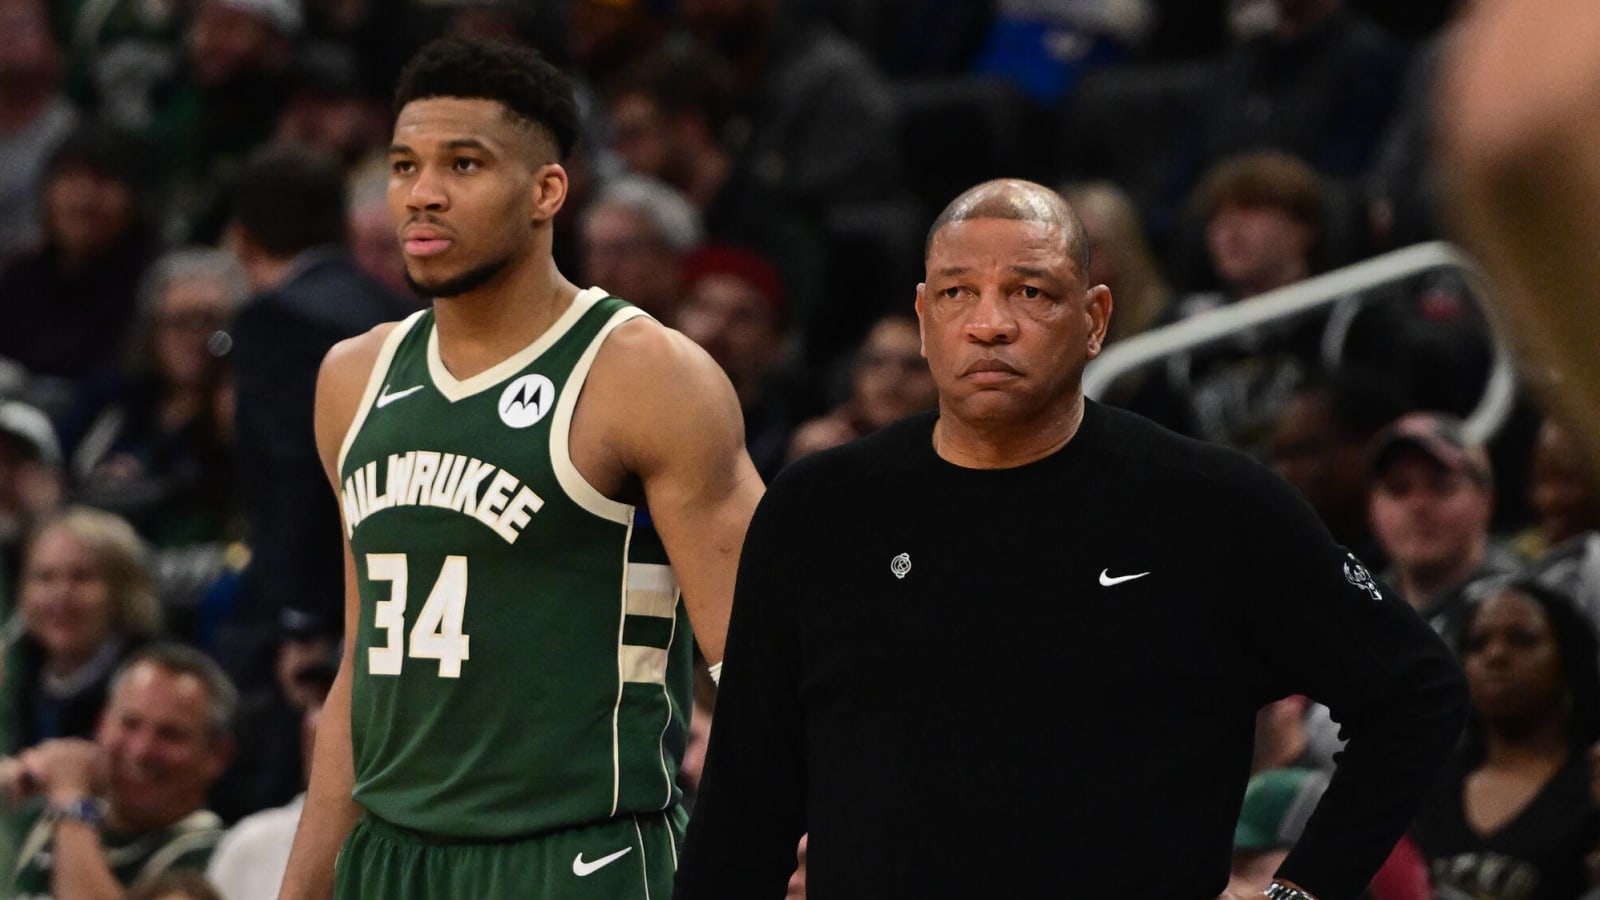 Doc Rivers is getting tough on struggling Bucks